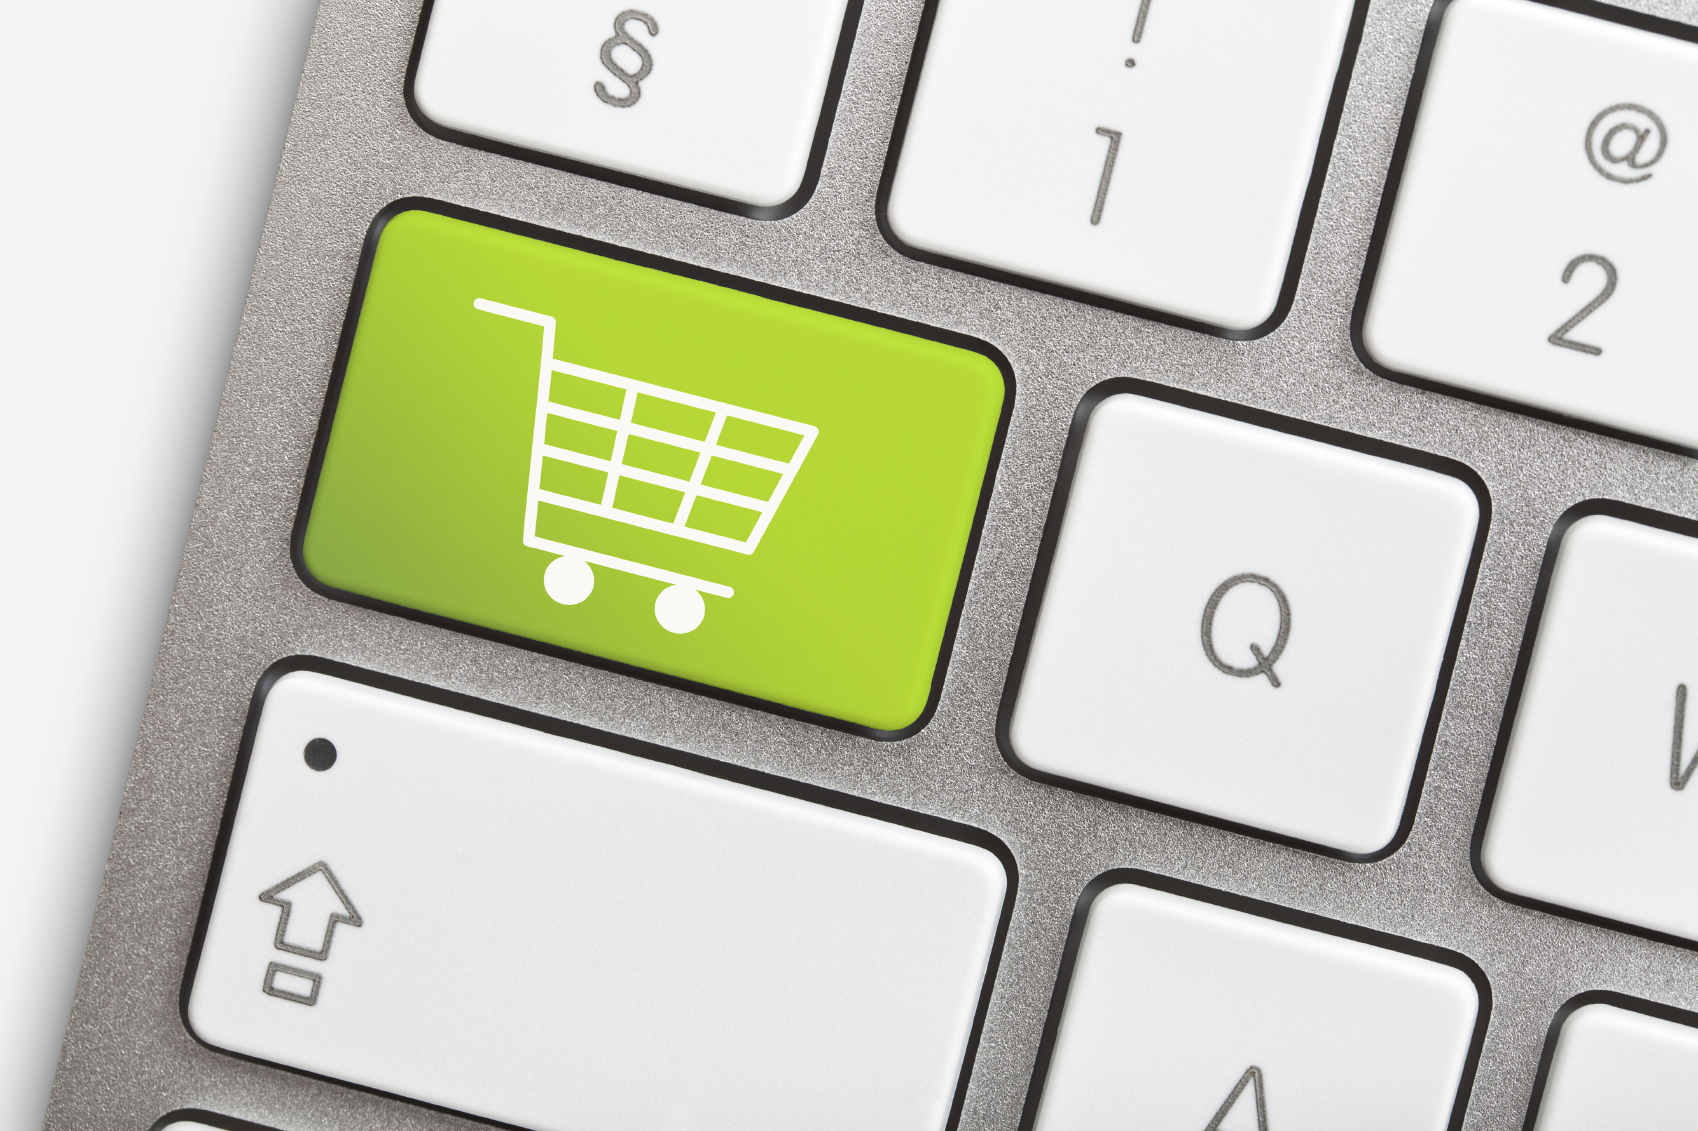 Why Features of e-Commerce eBay Makes it Stand Out from the Rest